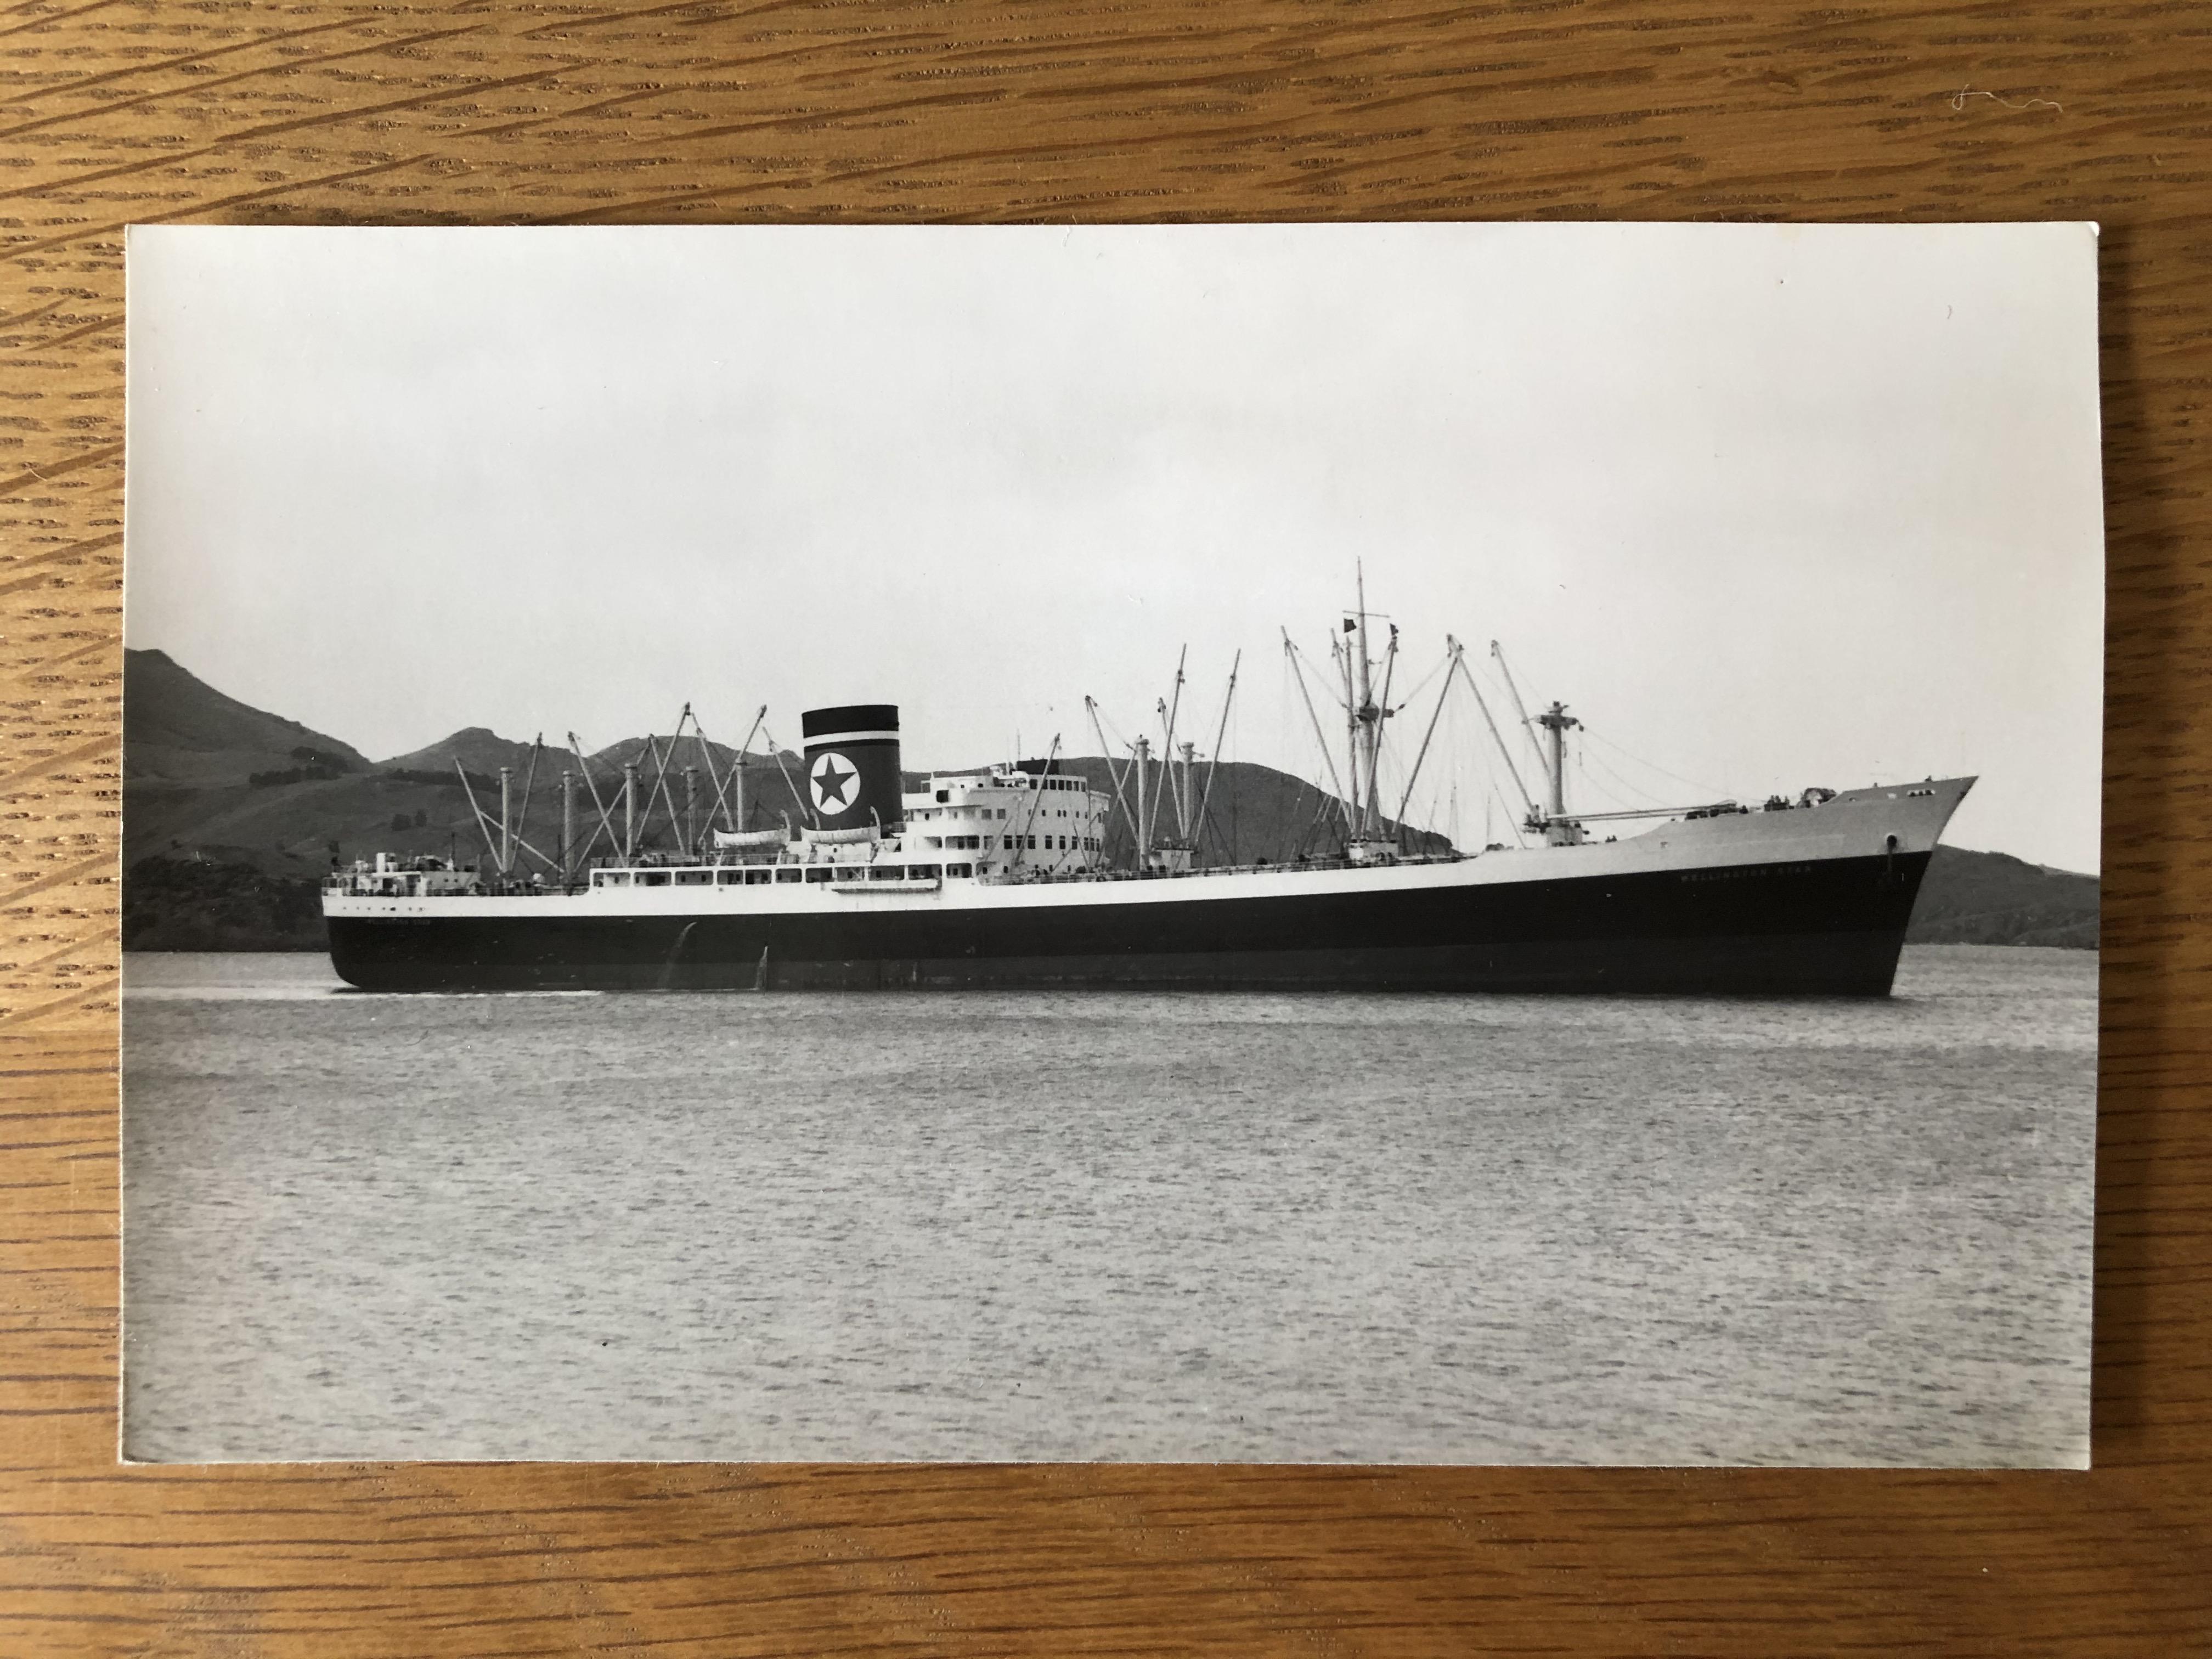 B/W PHOTOGRAPH OF THE BLUE STAR LINE VESSEL THE WELLINGTON STAR